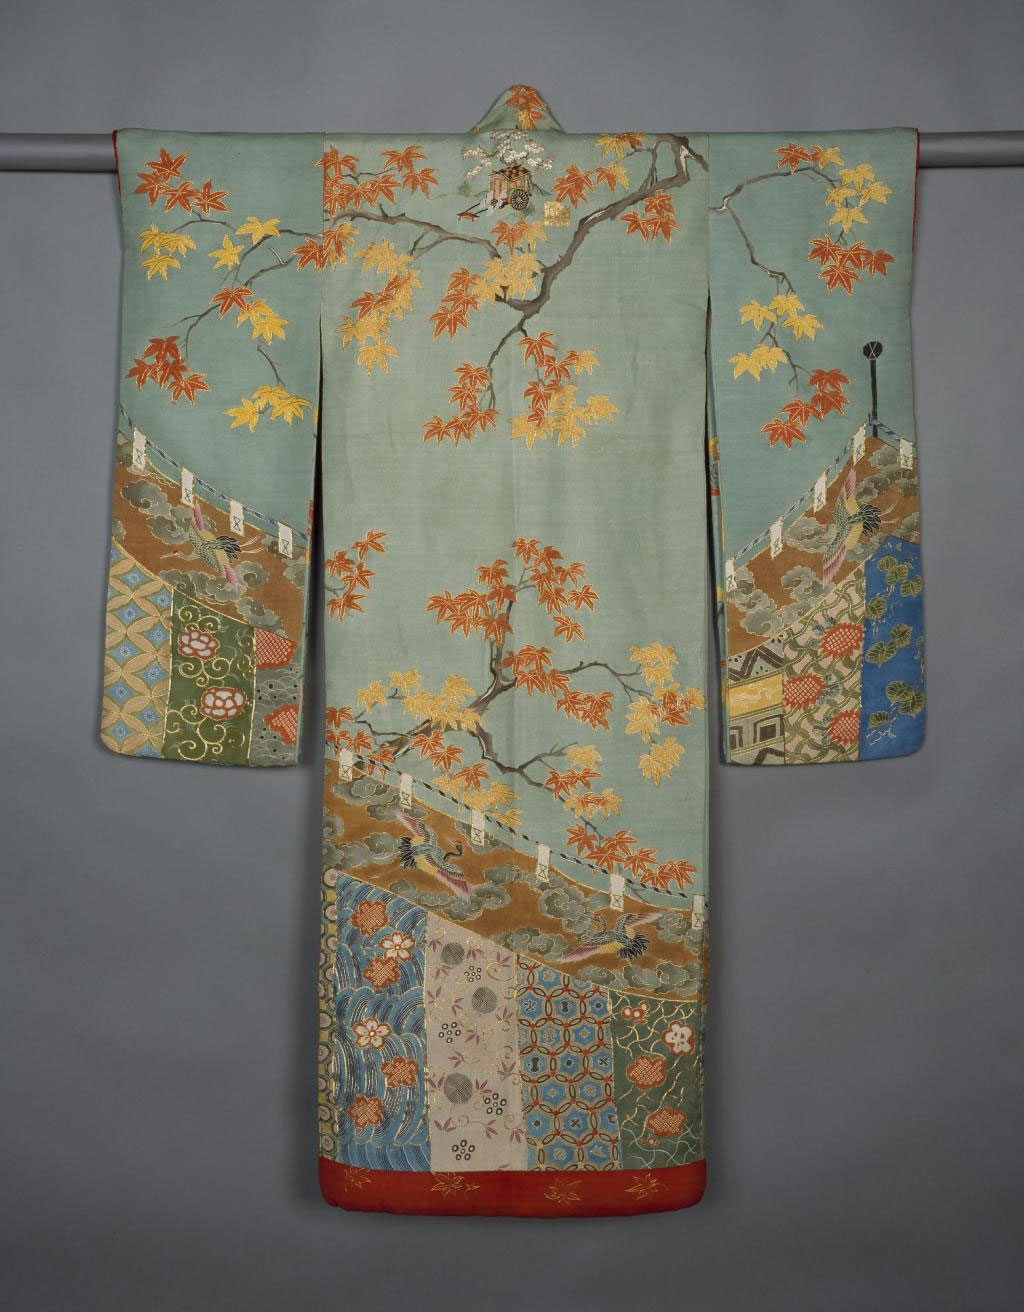 Young woman's robe (furisode), of rep silk with design of maple branches above a festival curtain, outlined with couched gold thread, with padded hem and red silk lining, possibly for wedding ceremony: Japan, 1868-1900.